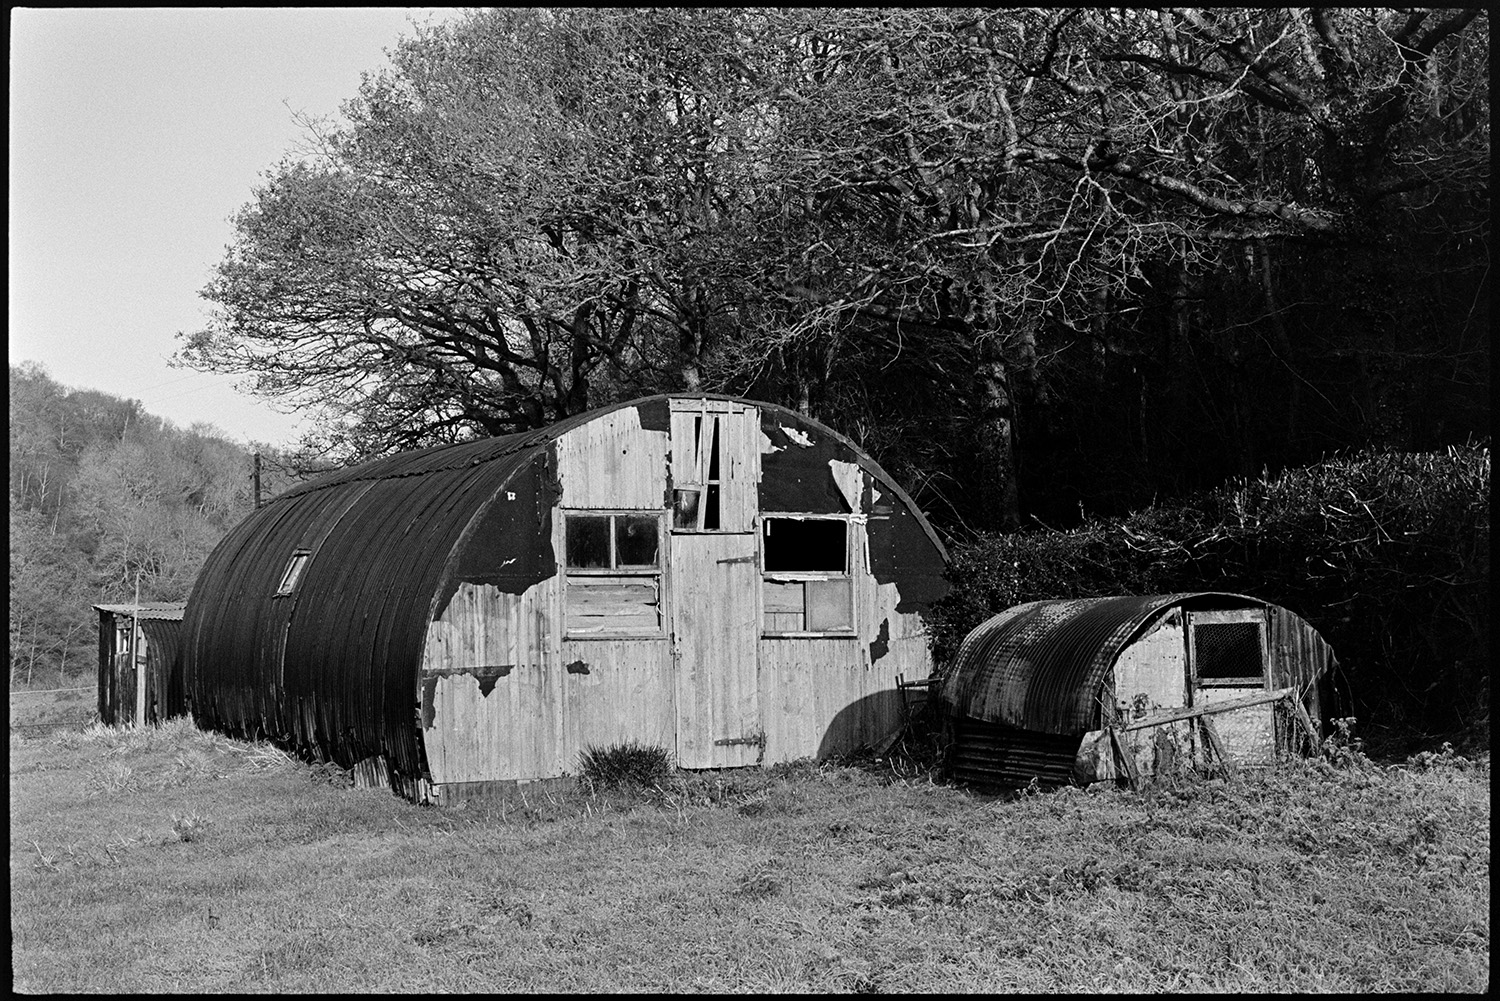 Farmer letting poultry out of poultry house and walking in lane. 
[Wooden and corrugated iron arced sheds in a field at Langridgeford. Trees and woodland can be seen in the background.]